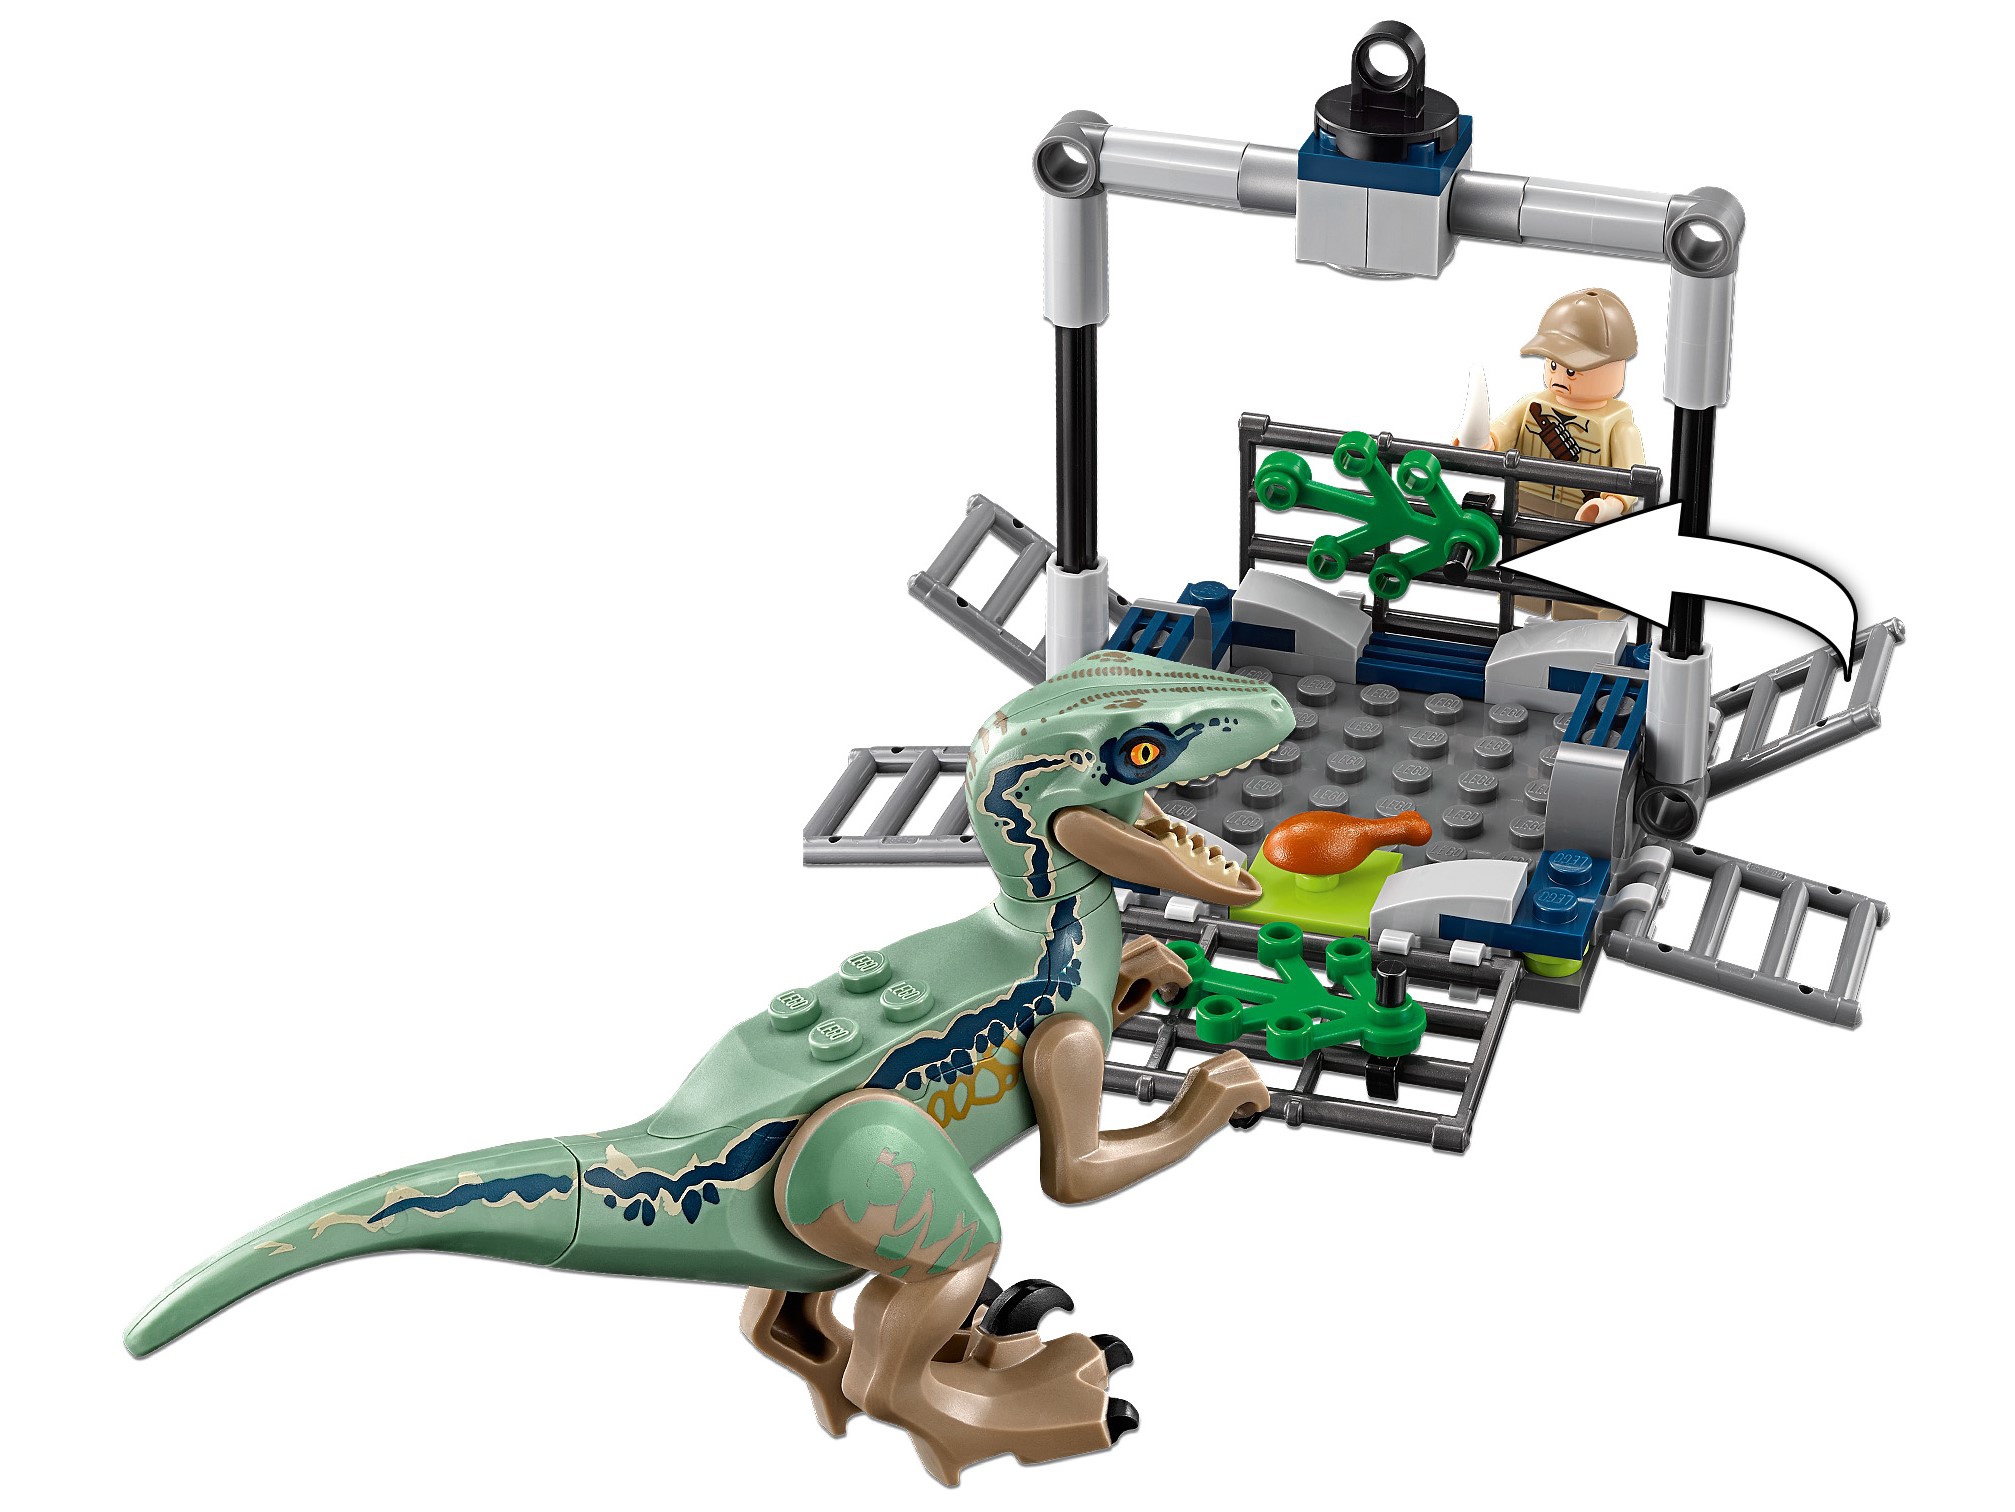 Blue's Helicopter Pursuit 75928 | Jurassic World™ | Buy online at 